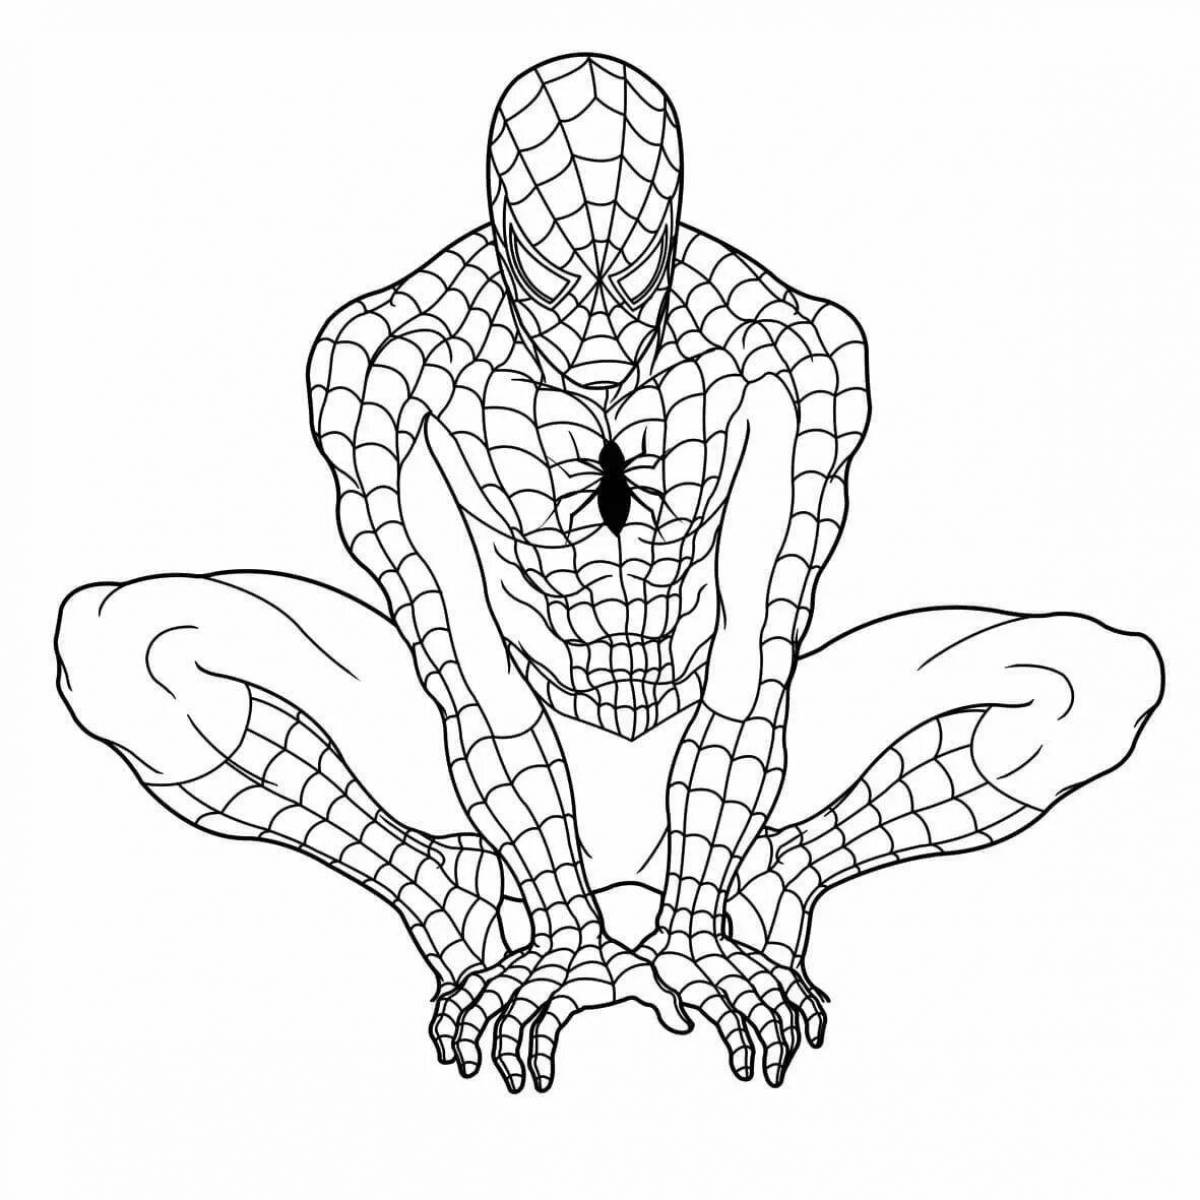 Fascinating Spiderman coloring book for kids